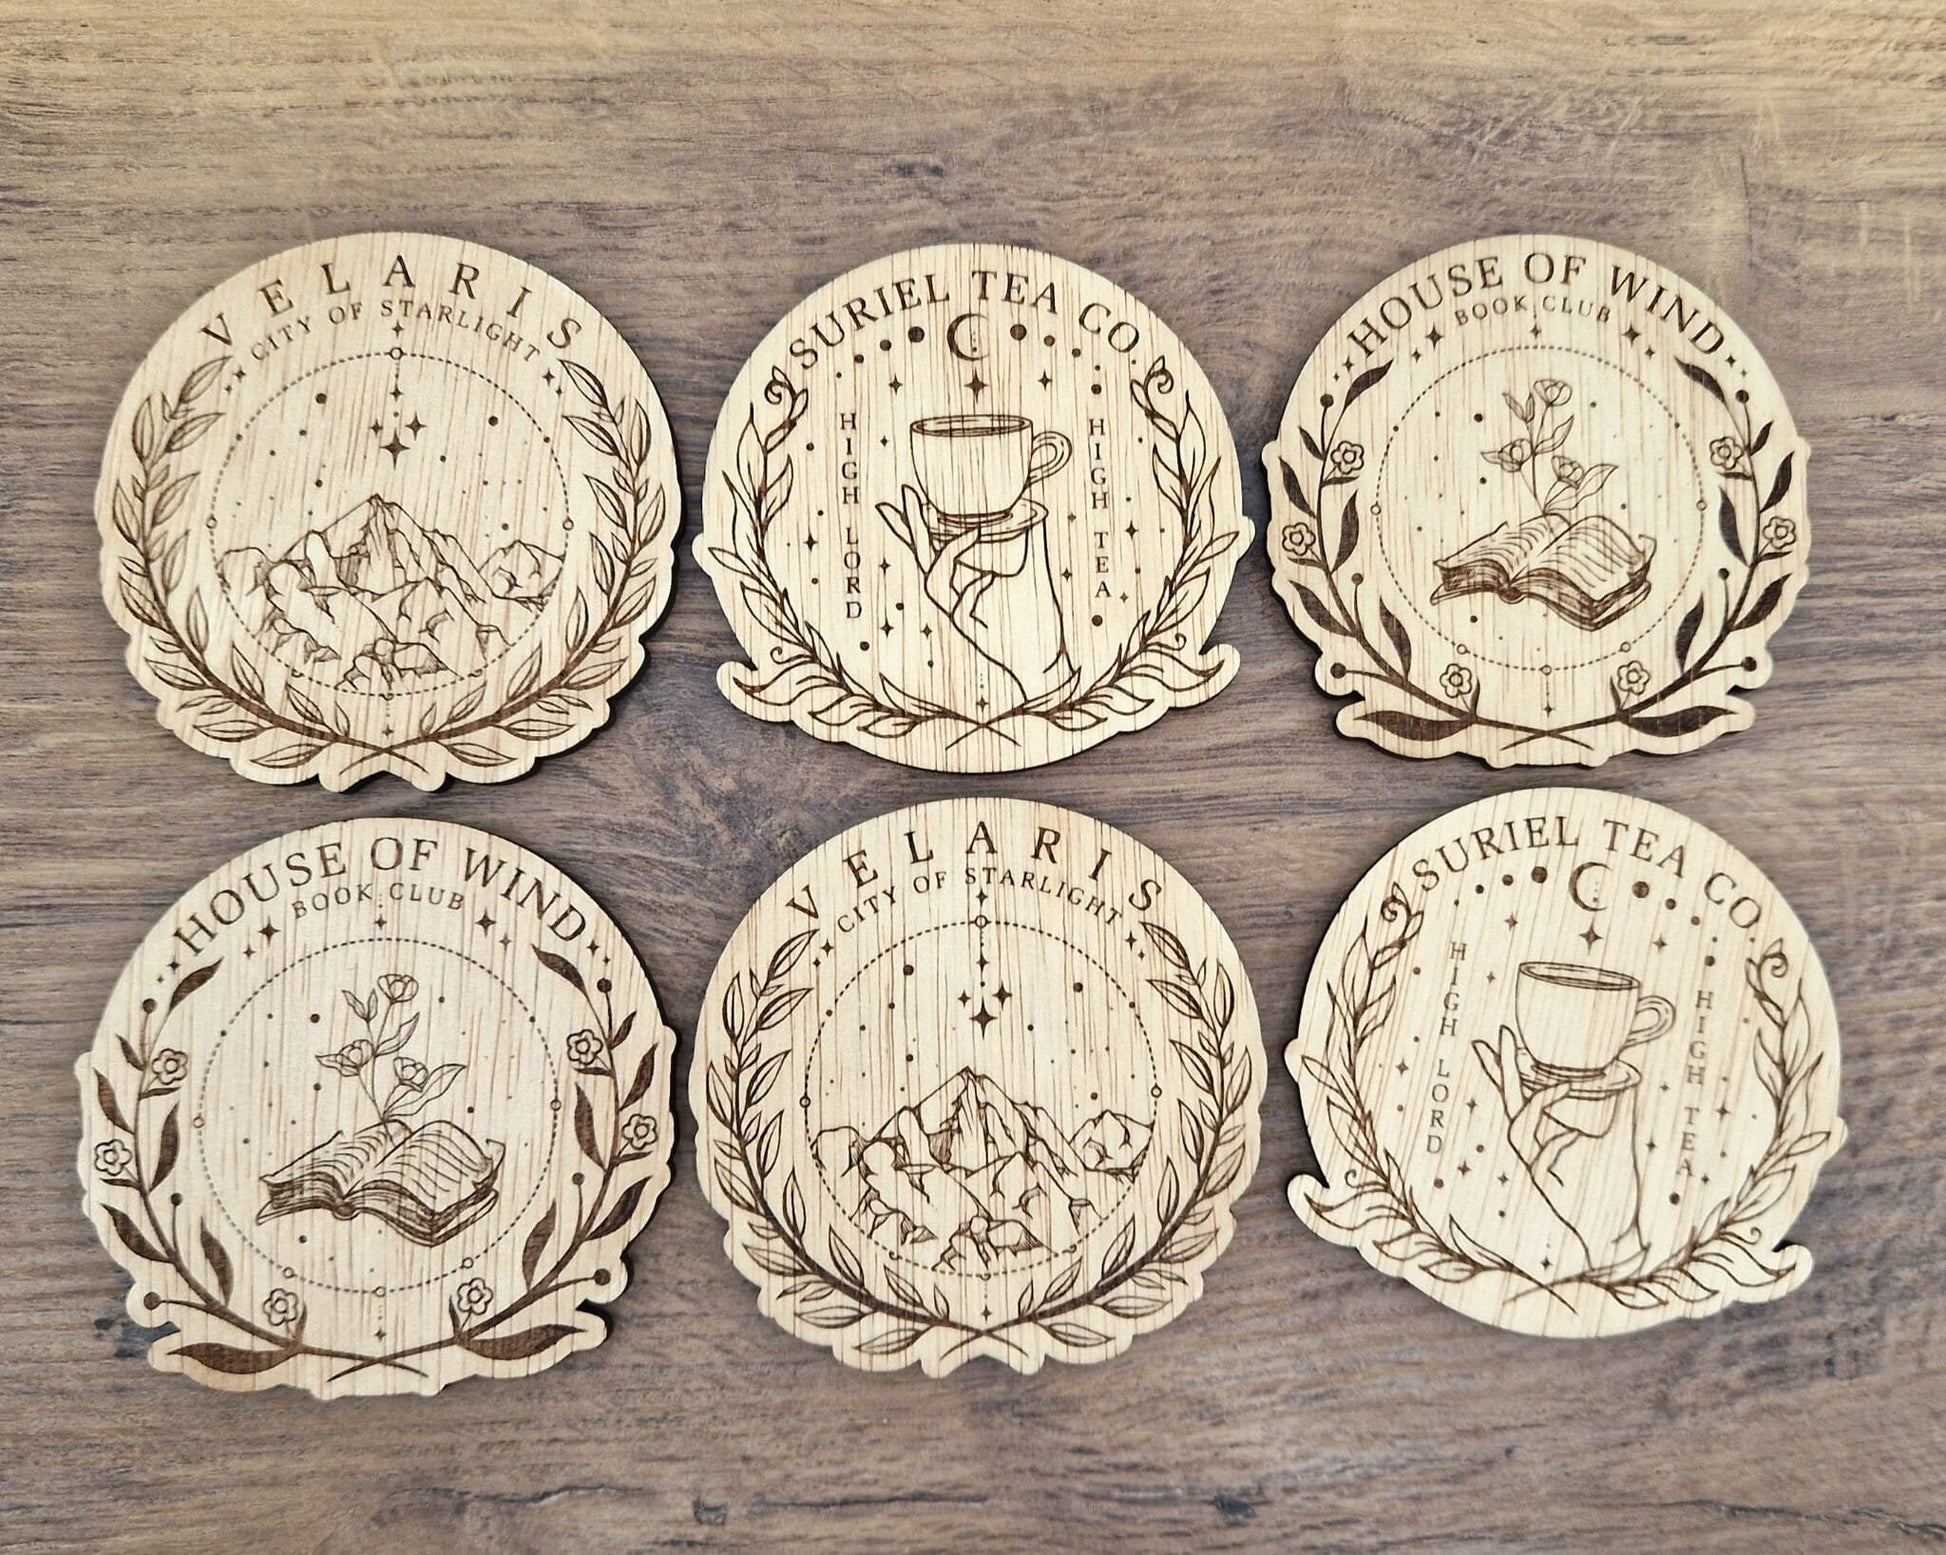 ACOTAR Inspired Coasters set of 6 - Book Fan Gift - Home Decor - Present - A court of Thorns and Roses book series